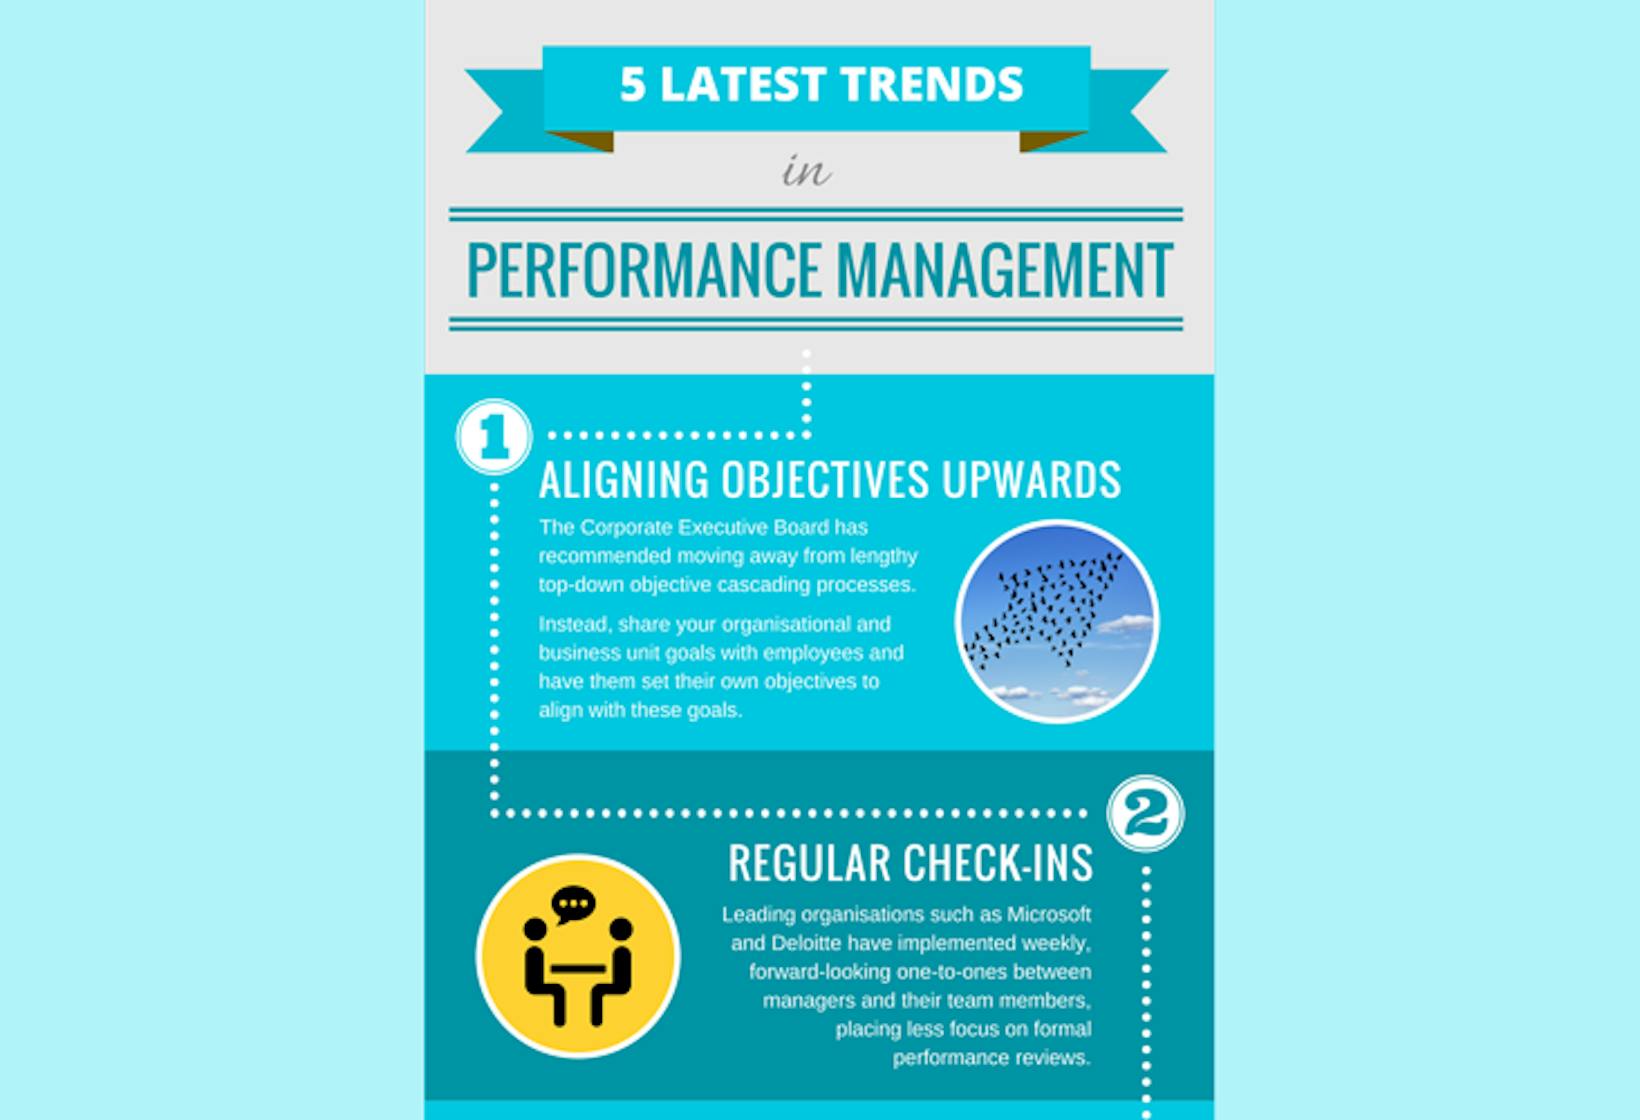 5 Latest Trends in Performance Management [Infographic]